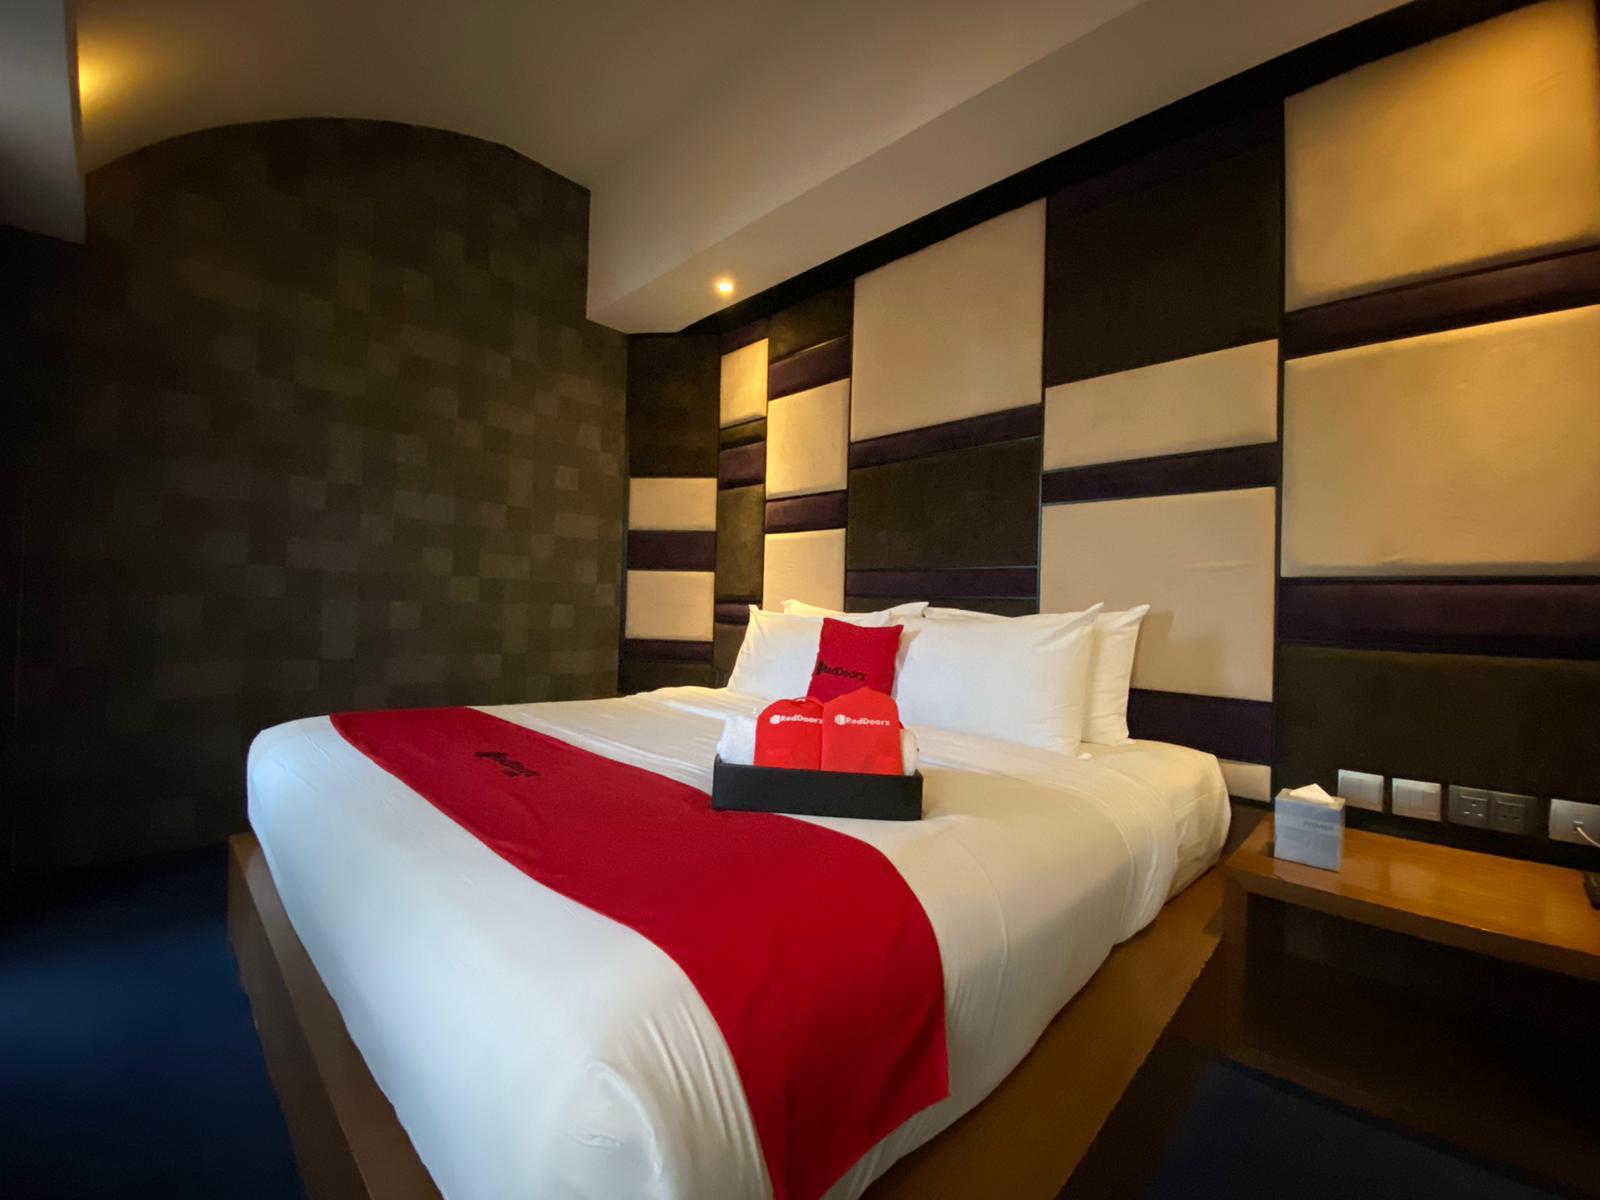 Singapore-based hotel startup RedDoorz announces aggressive expansion plans and future IPO